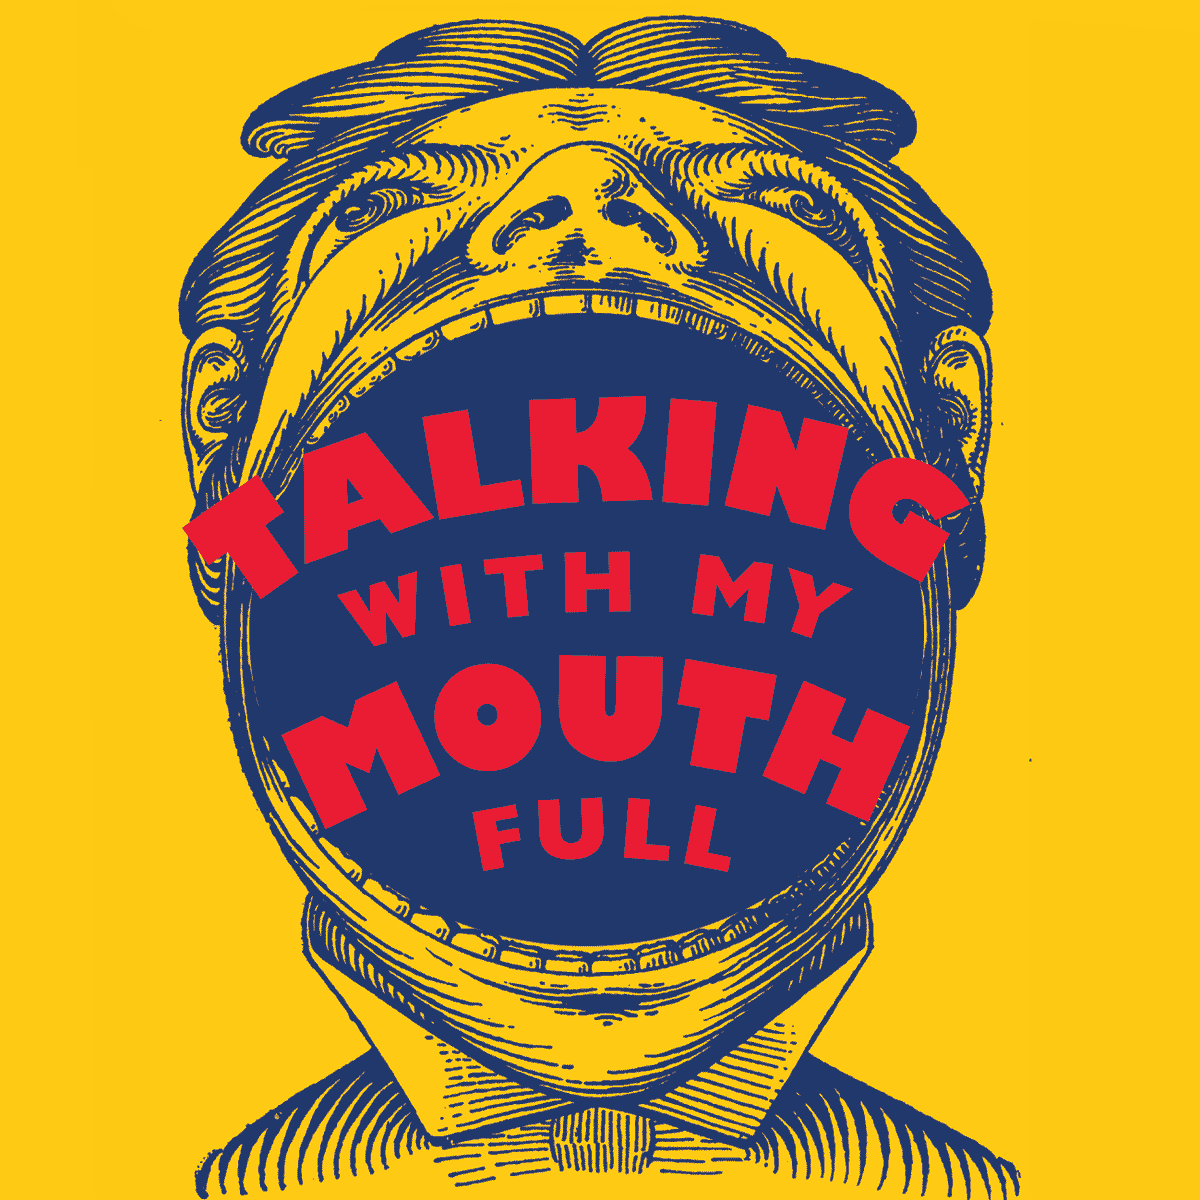 The Talking With My Mouth Full logo.